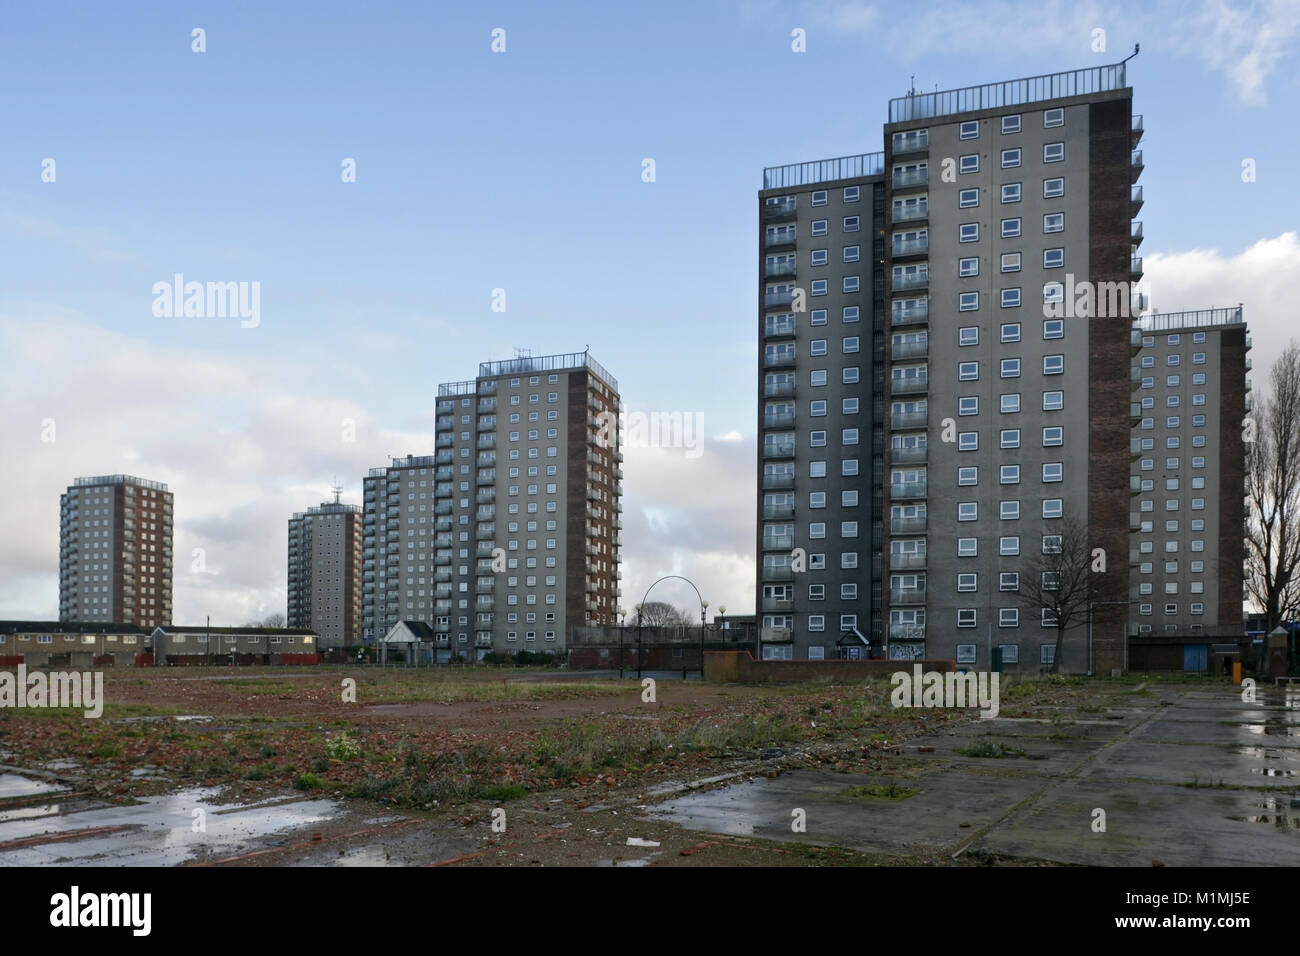 East Marsh high rise council flats, Grimsby, UK. Stock Photo